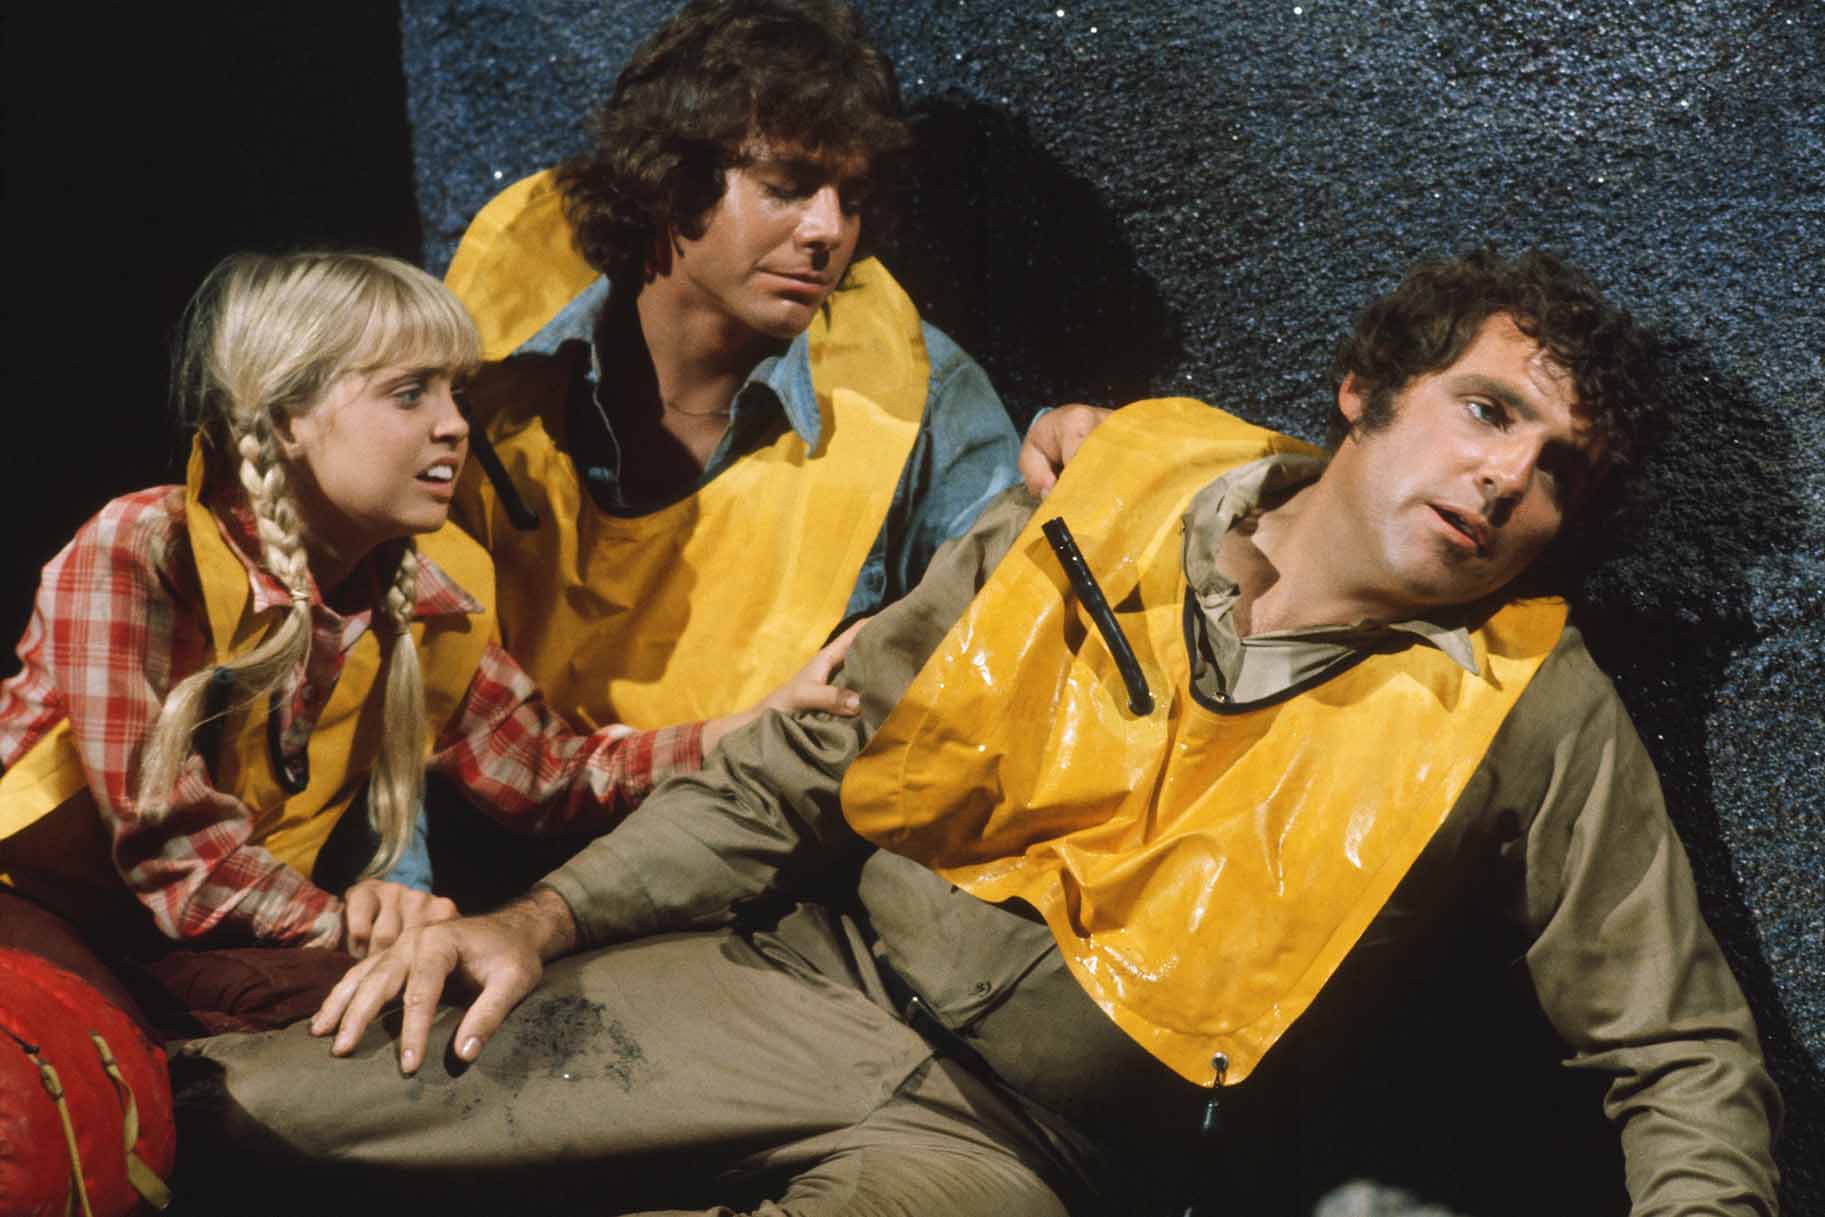 Spencer Milligan, Who Played Rick Marshall in NBC's Land of the Lost TV Show, Dies at 86